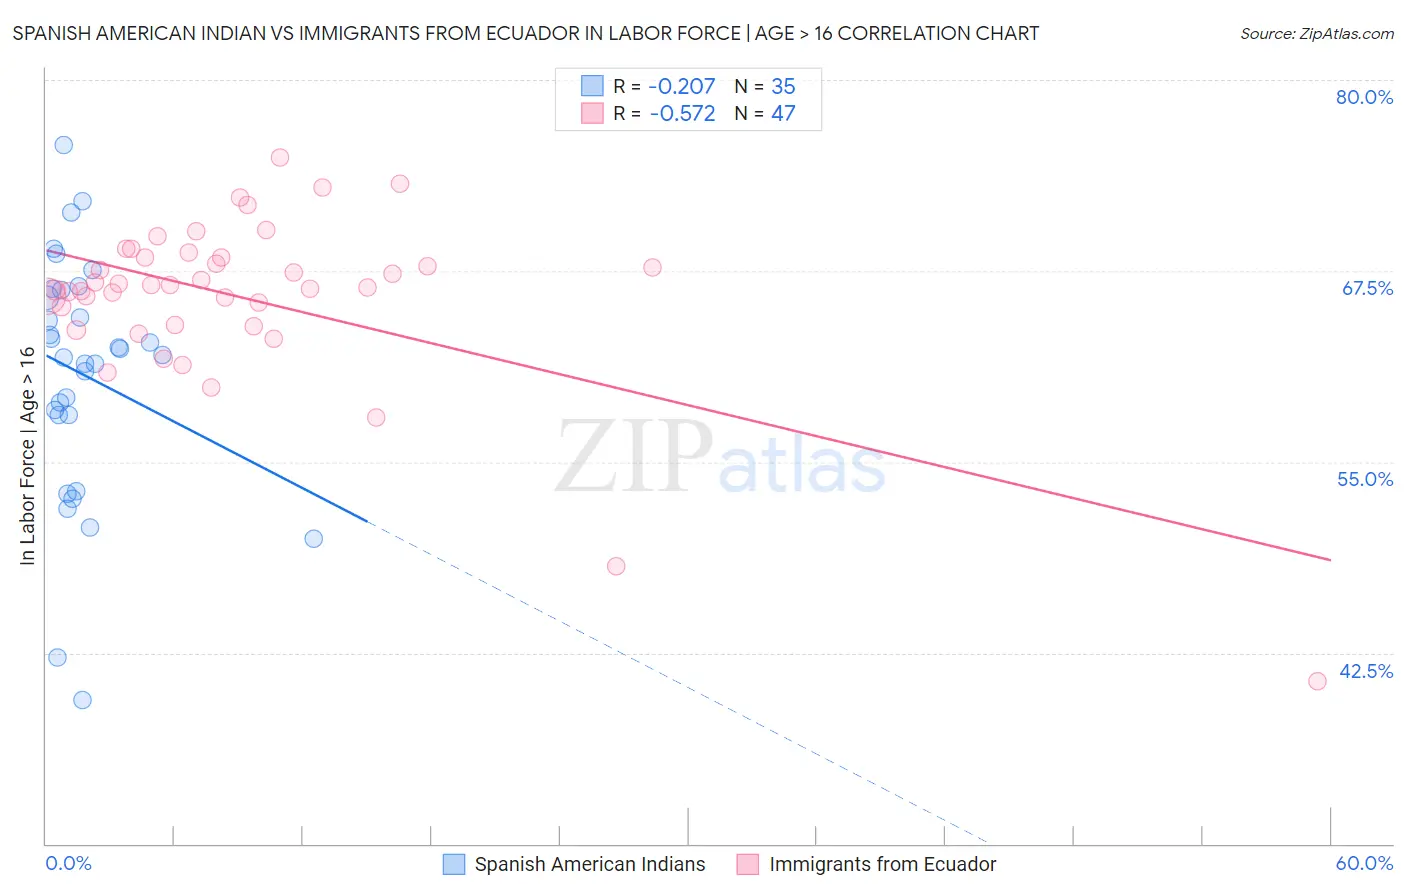 Spanish American Indian vs Immigrants from Ecuador In Labor Force | Age > 16